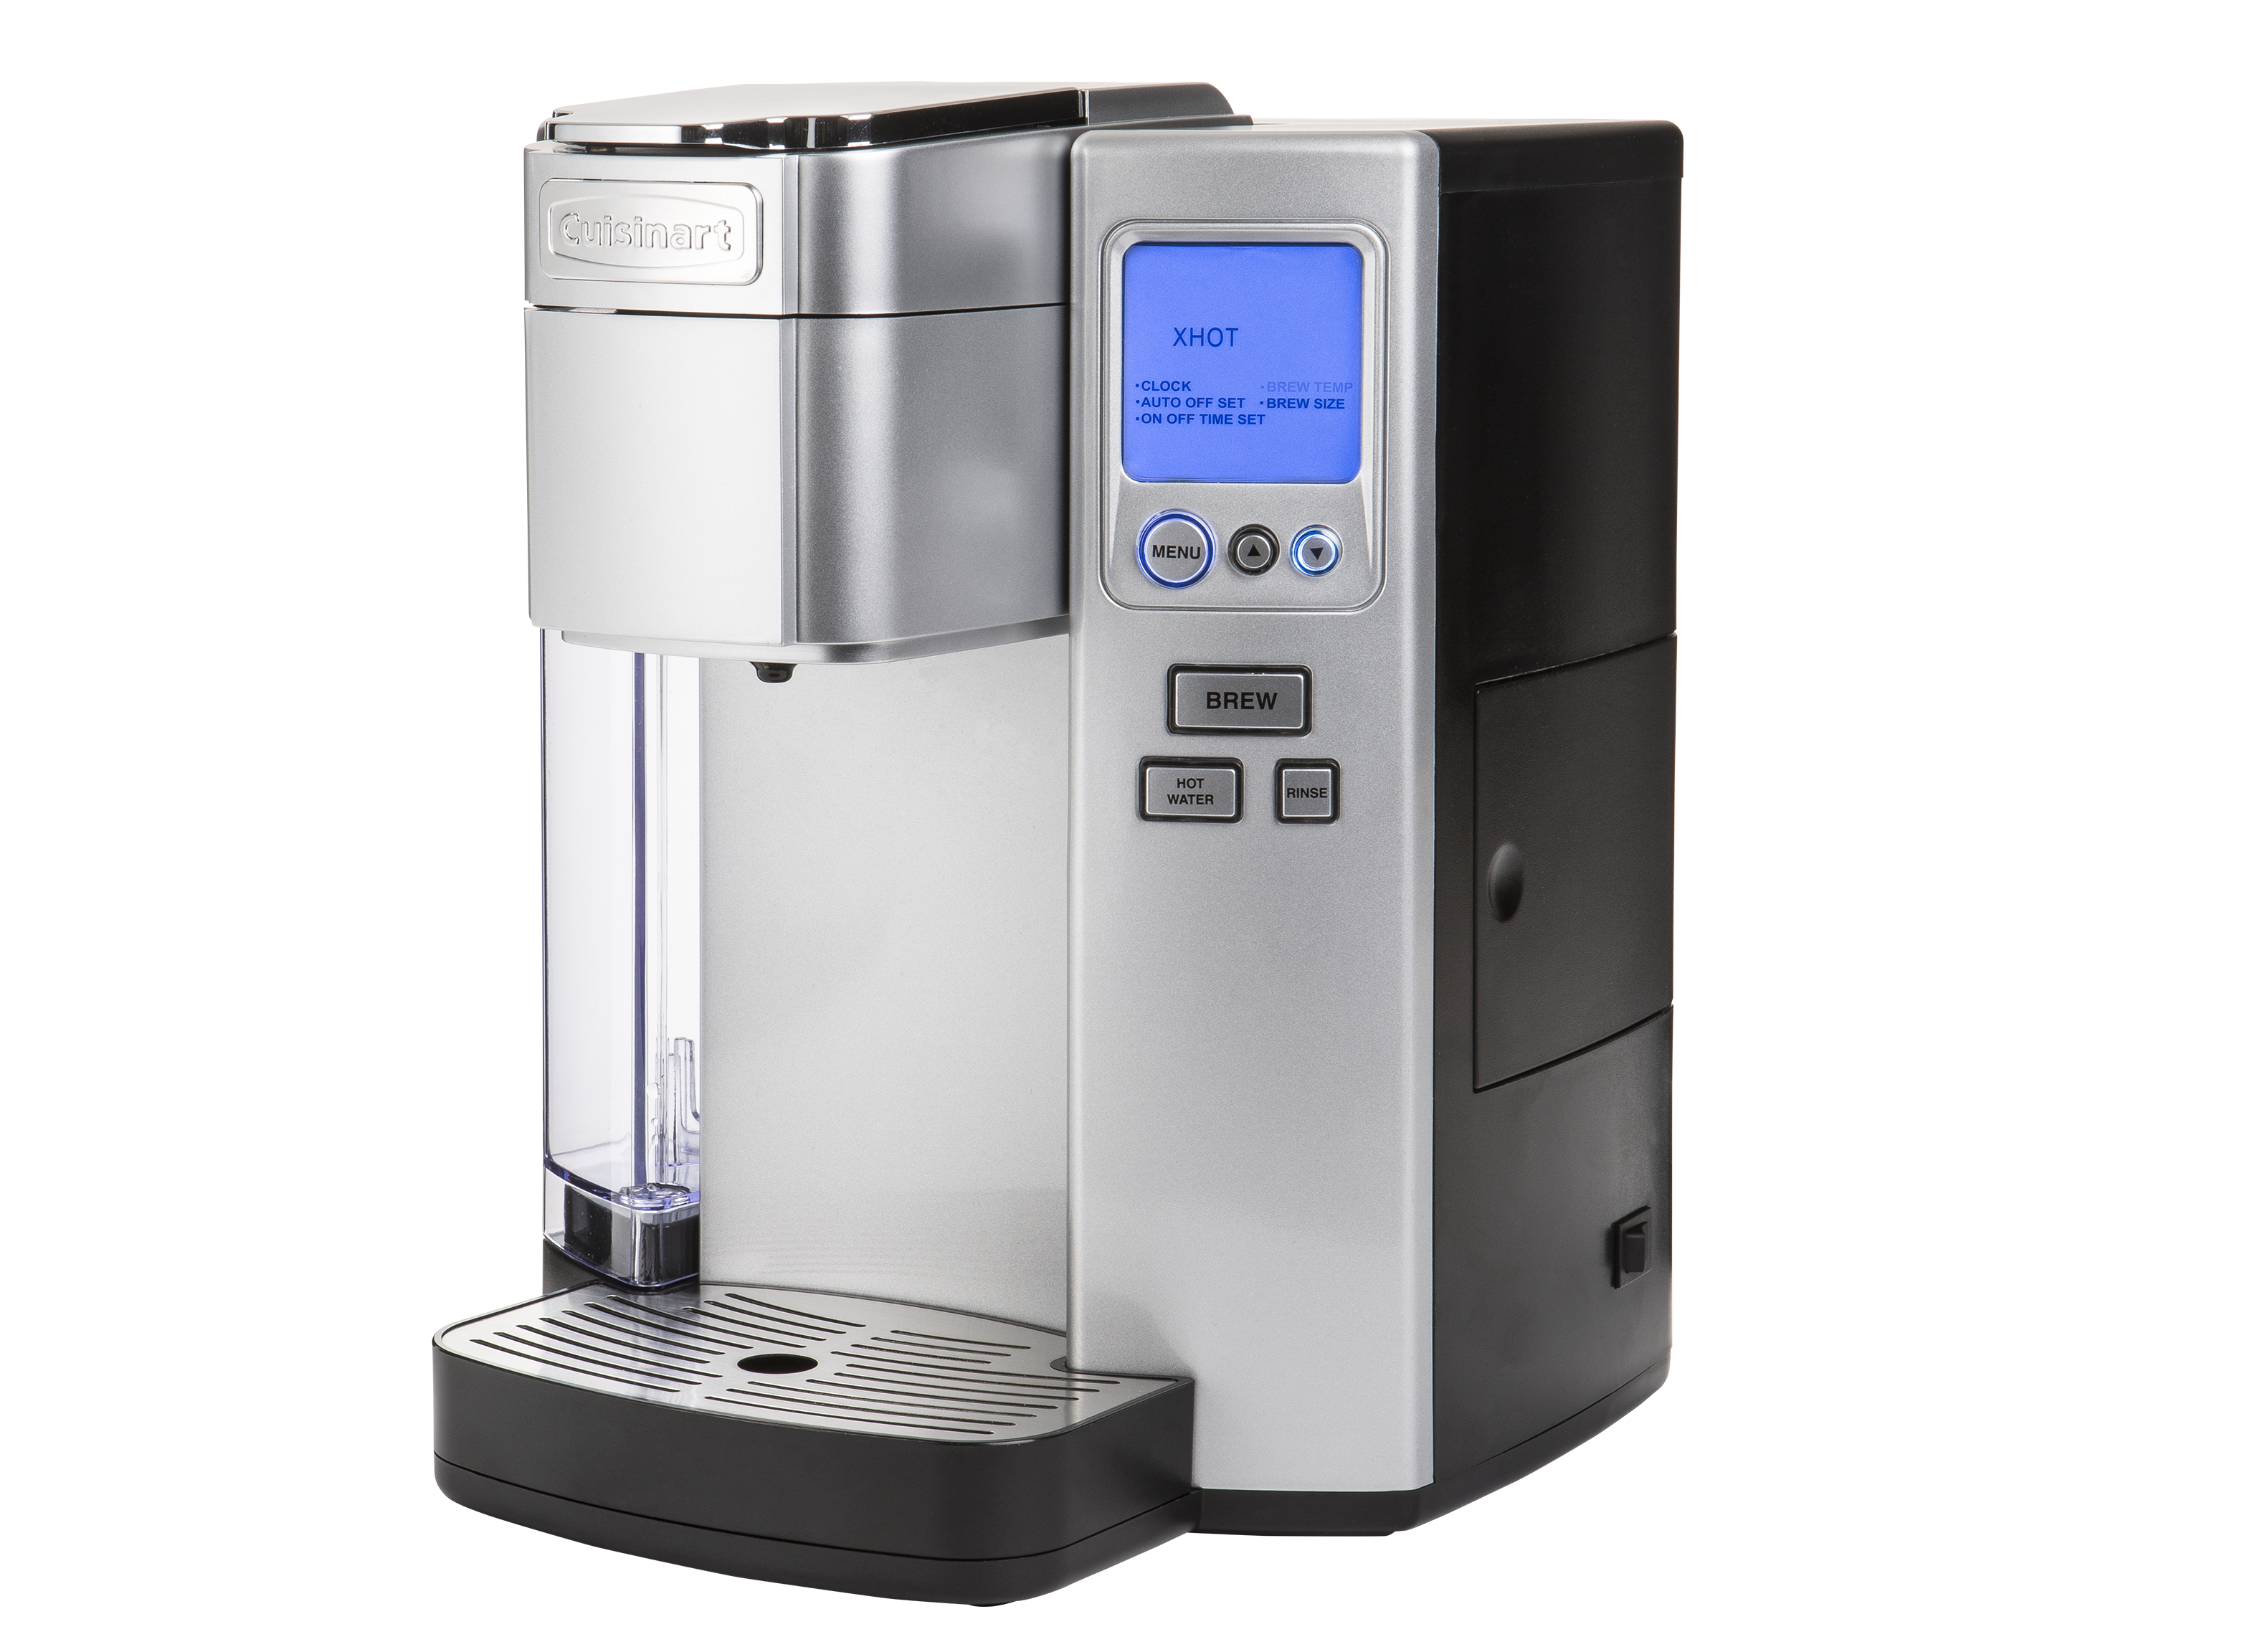 https://crdms.images.consumerreports.org/prod/products/cr/models/386076-singleservecoffeemakers-cuisinart-premiumsingleservebrewerss10.png